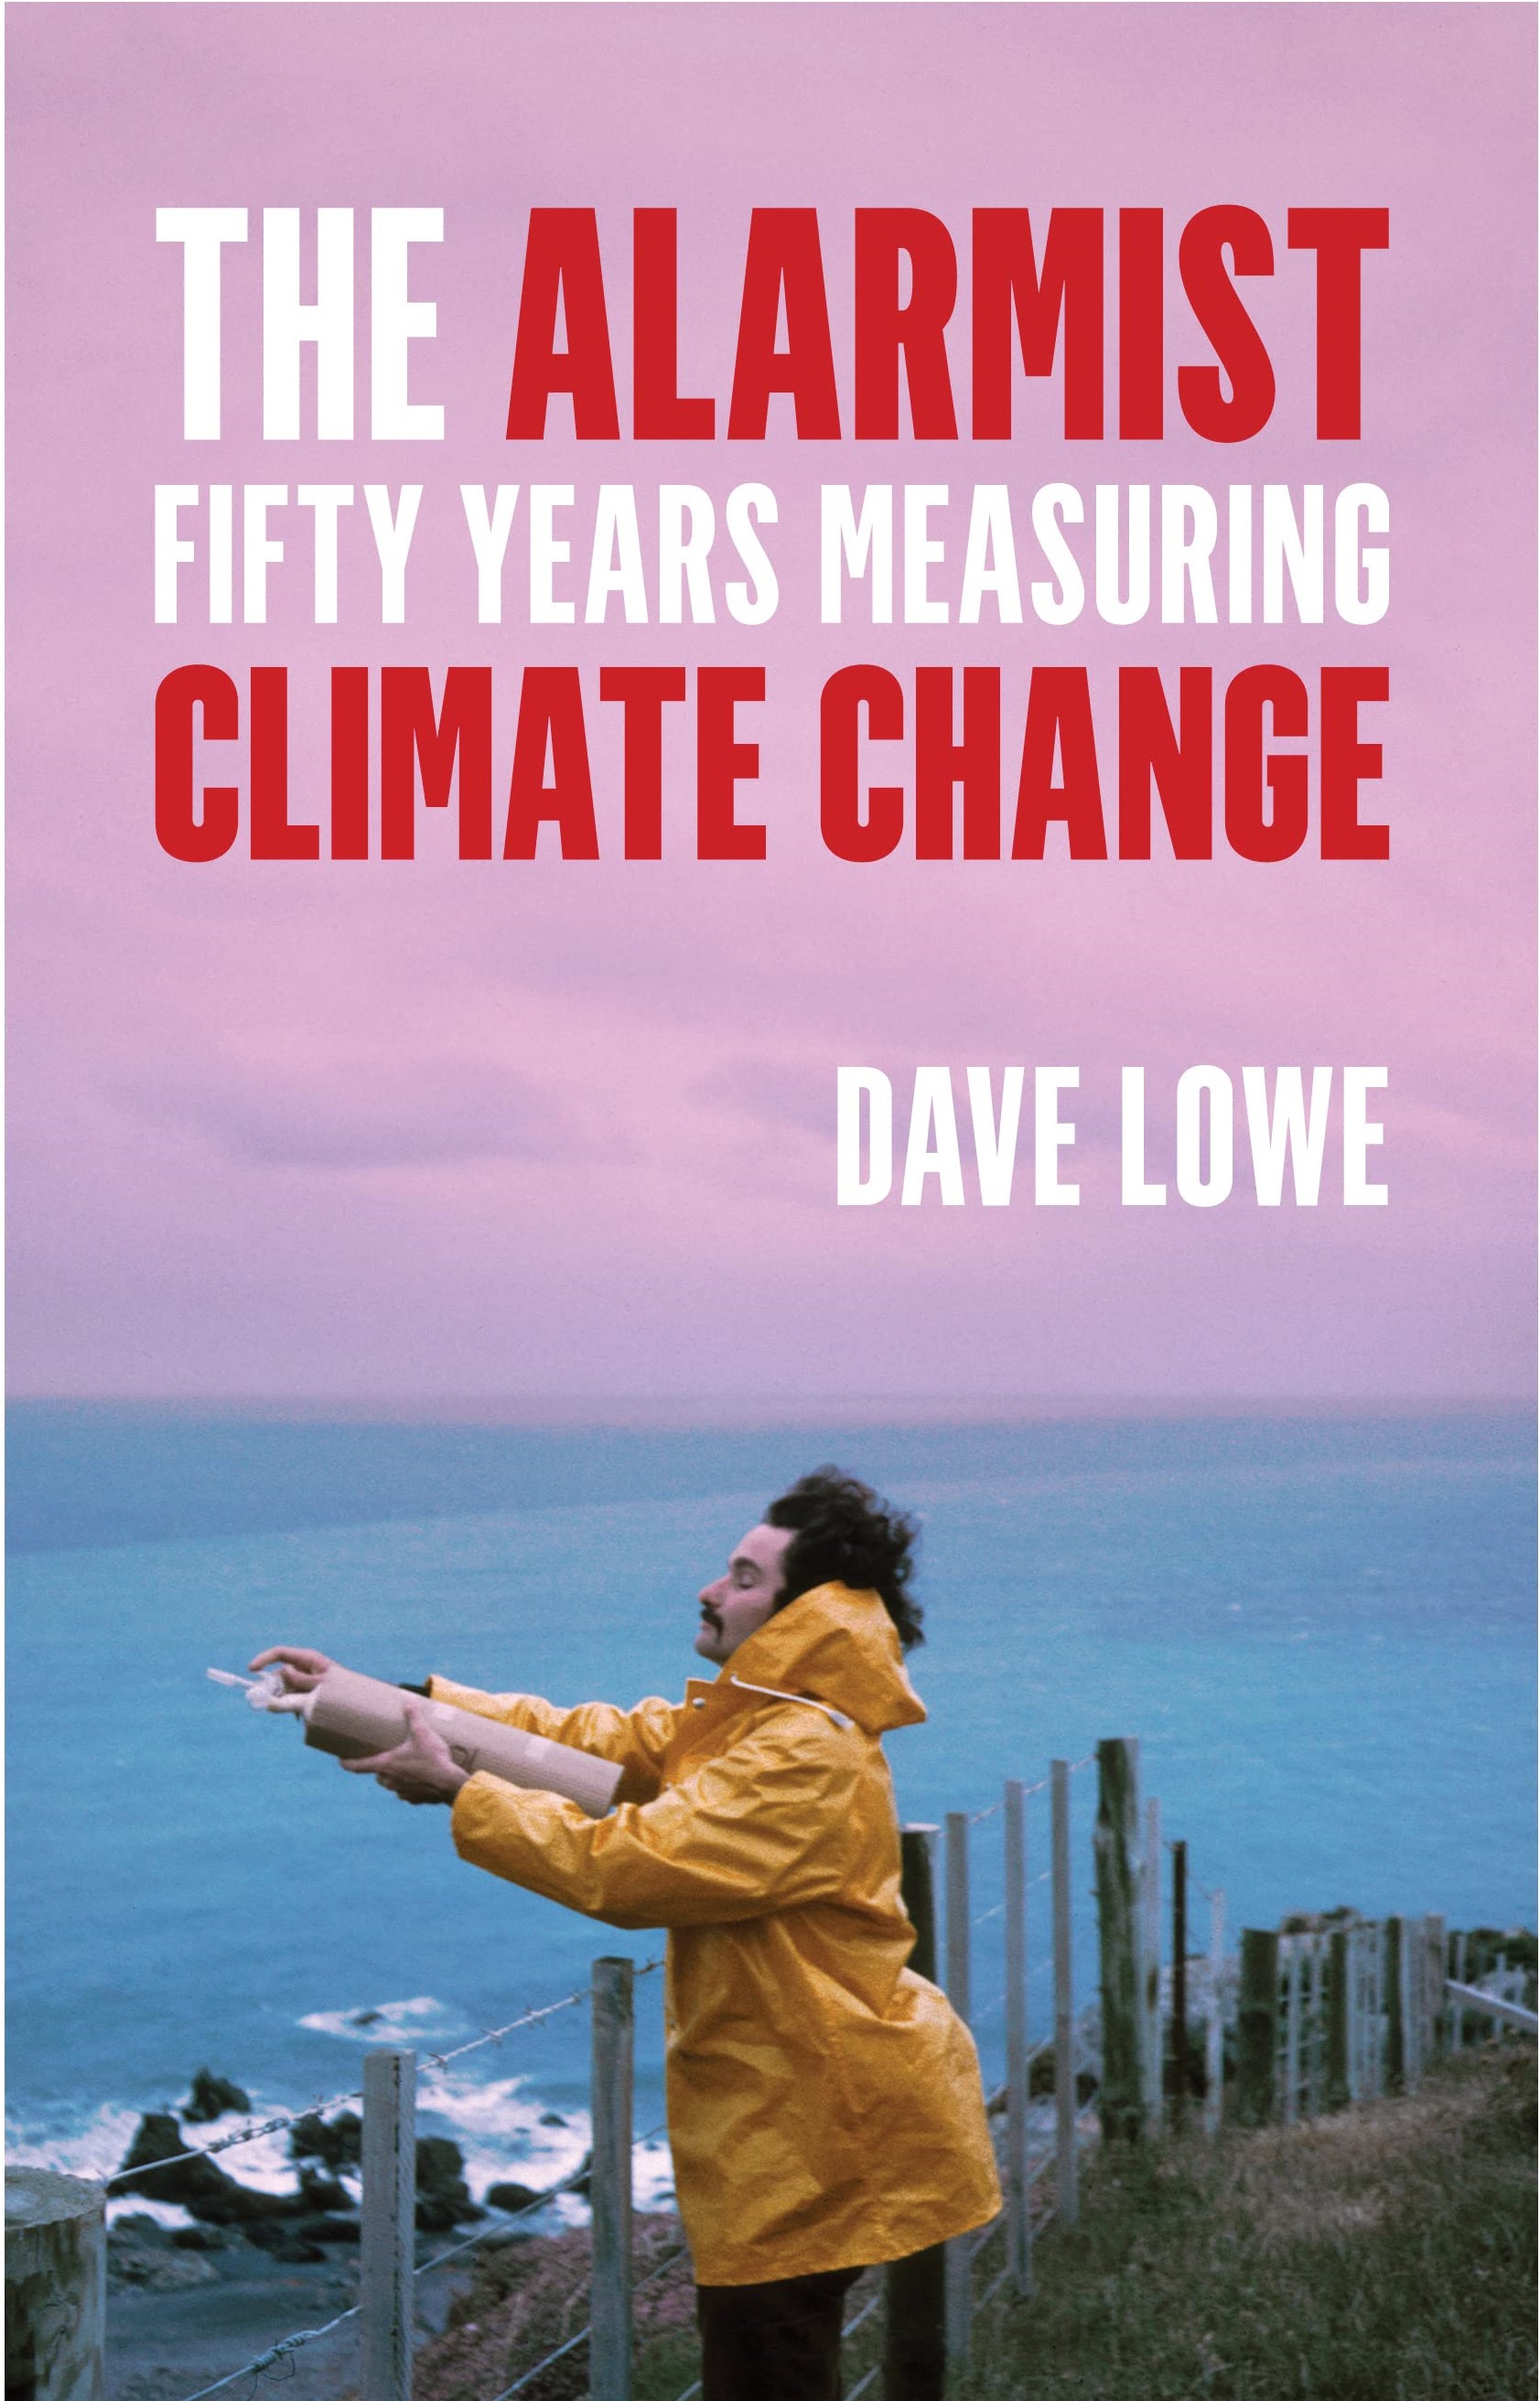 The Alarmist: Fifty Years Measuring Climate Change